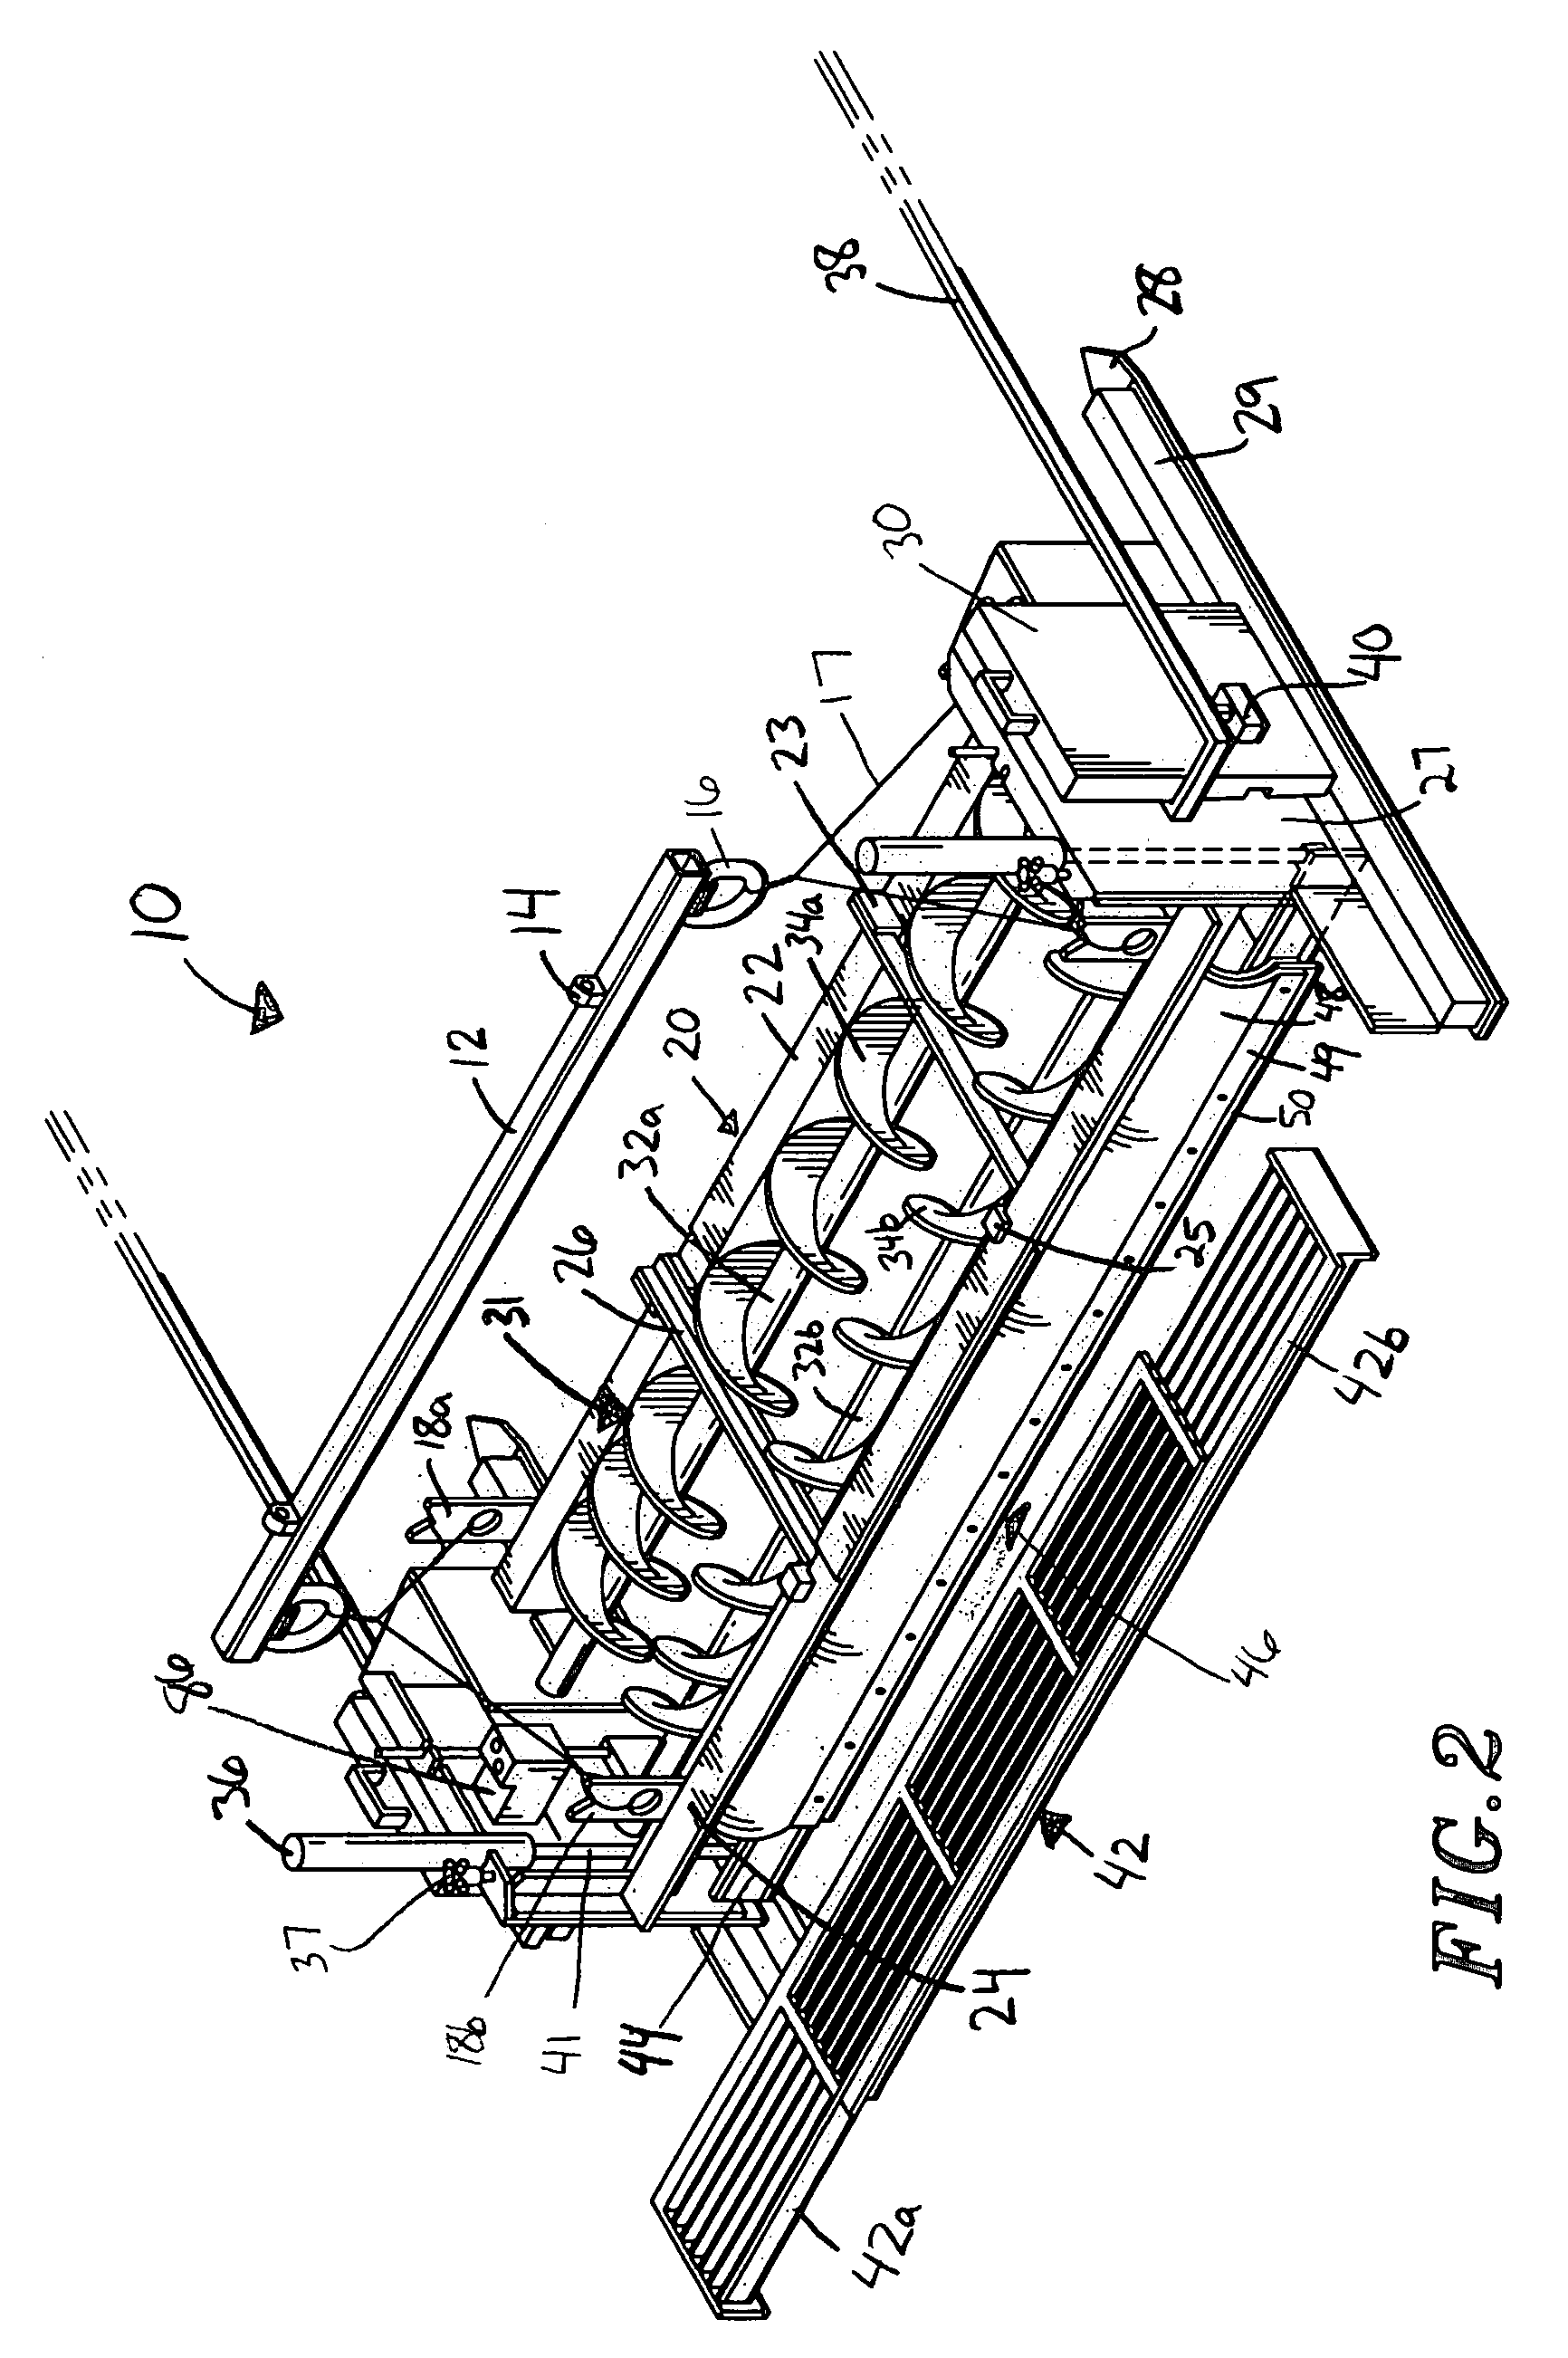 Portable drag box with automated shearing device